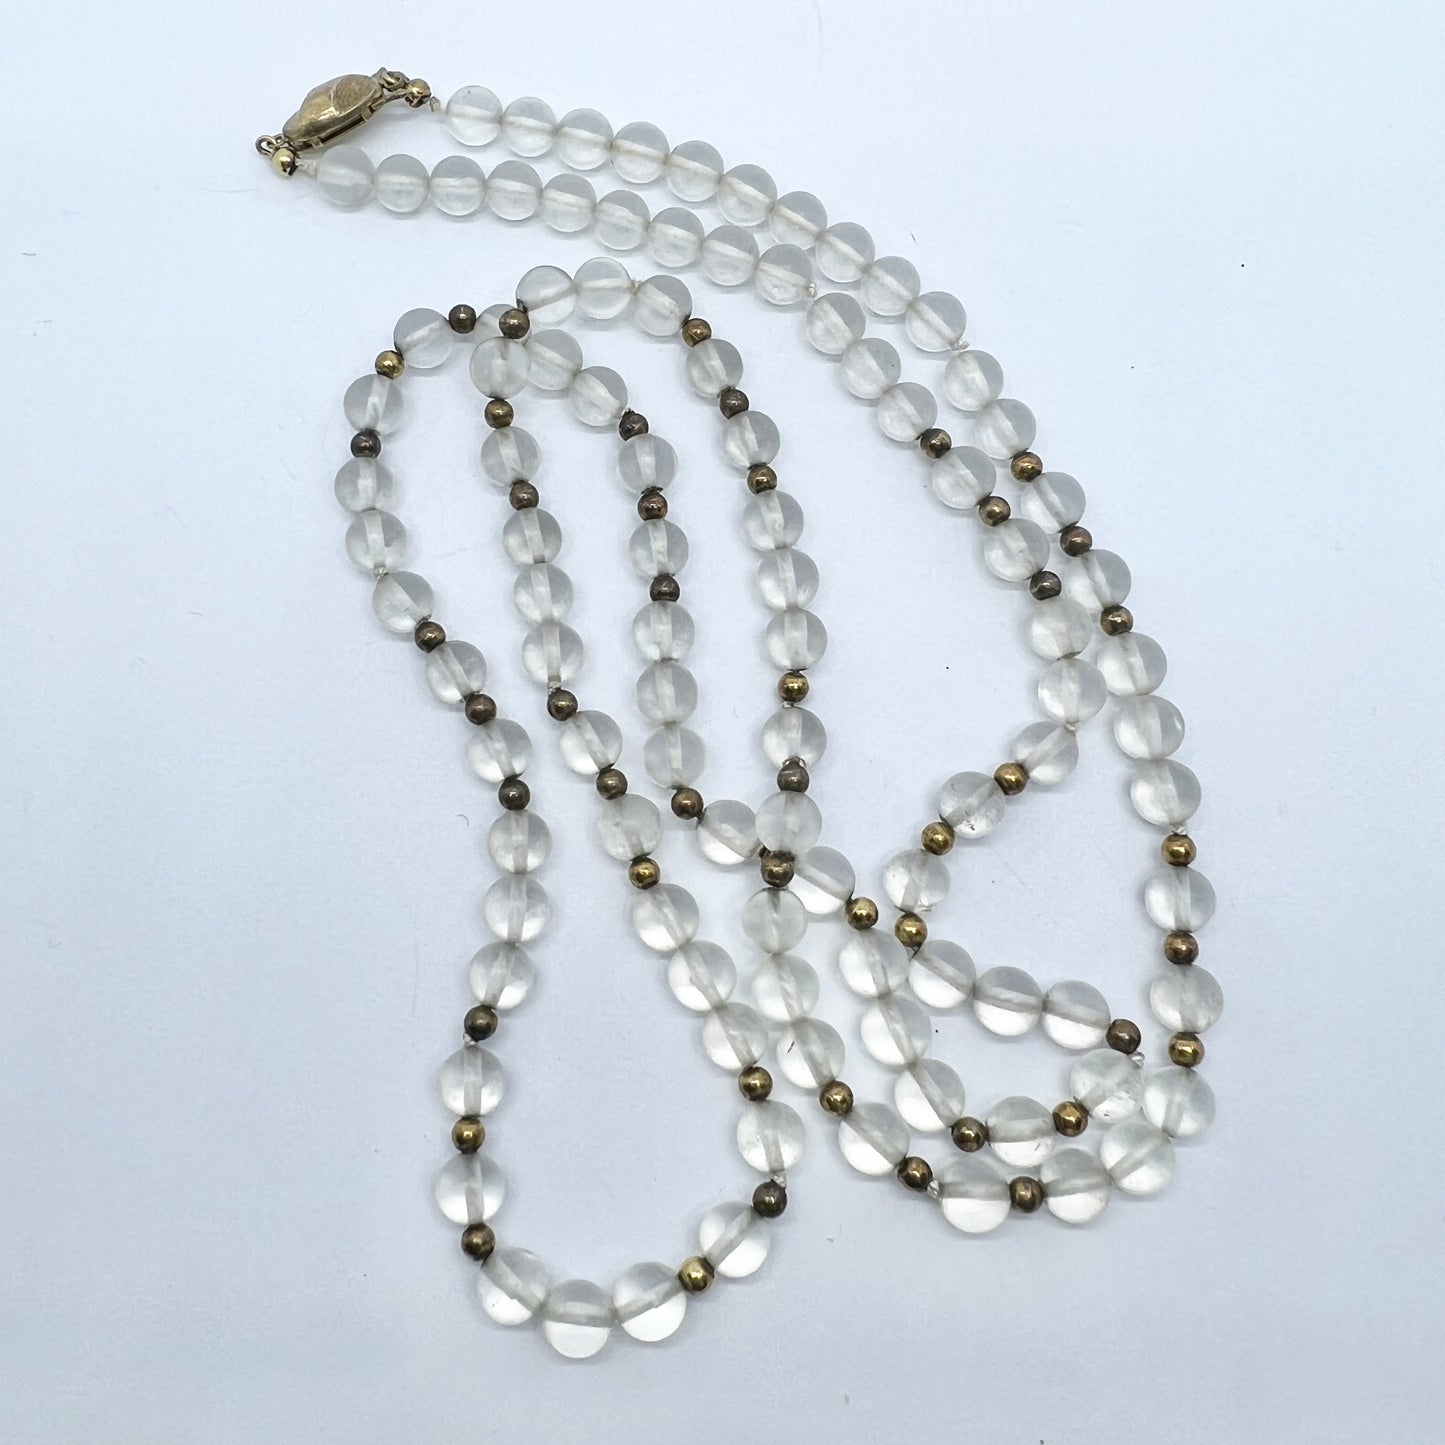 Vintage c 1950s. 835 Silver Rock Crystal Beads Necklace.